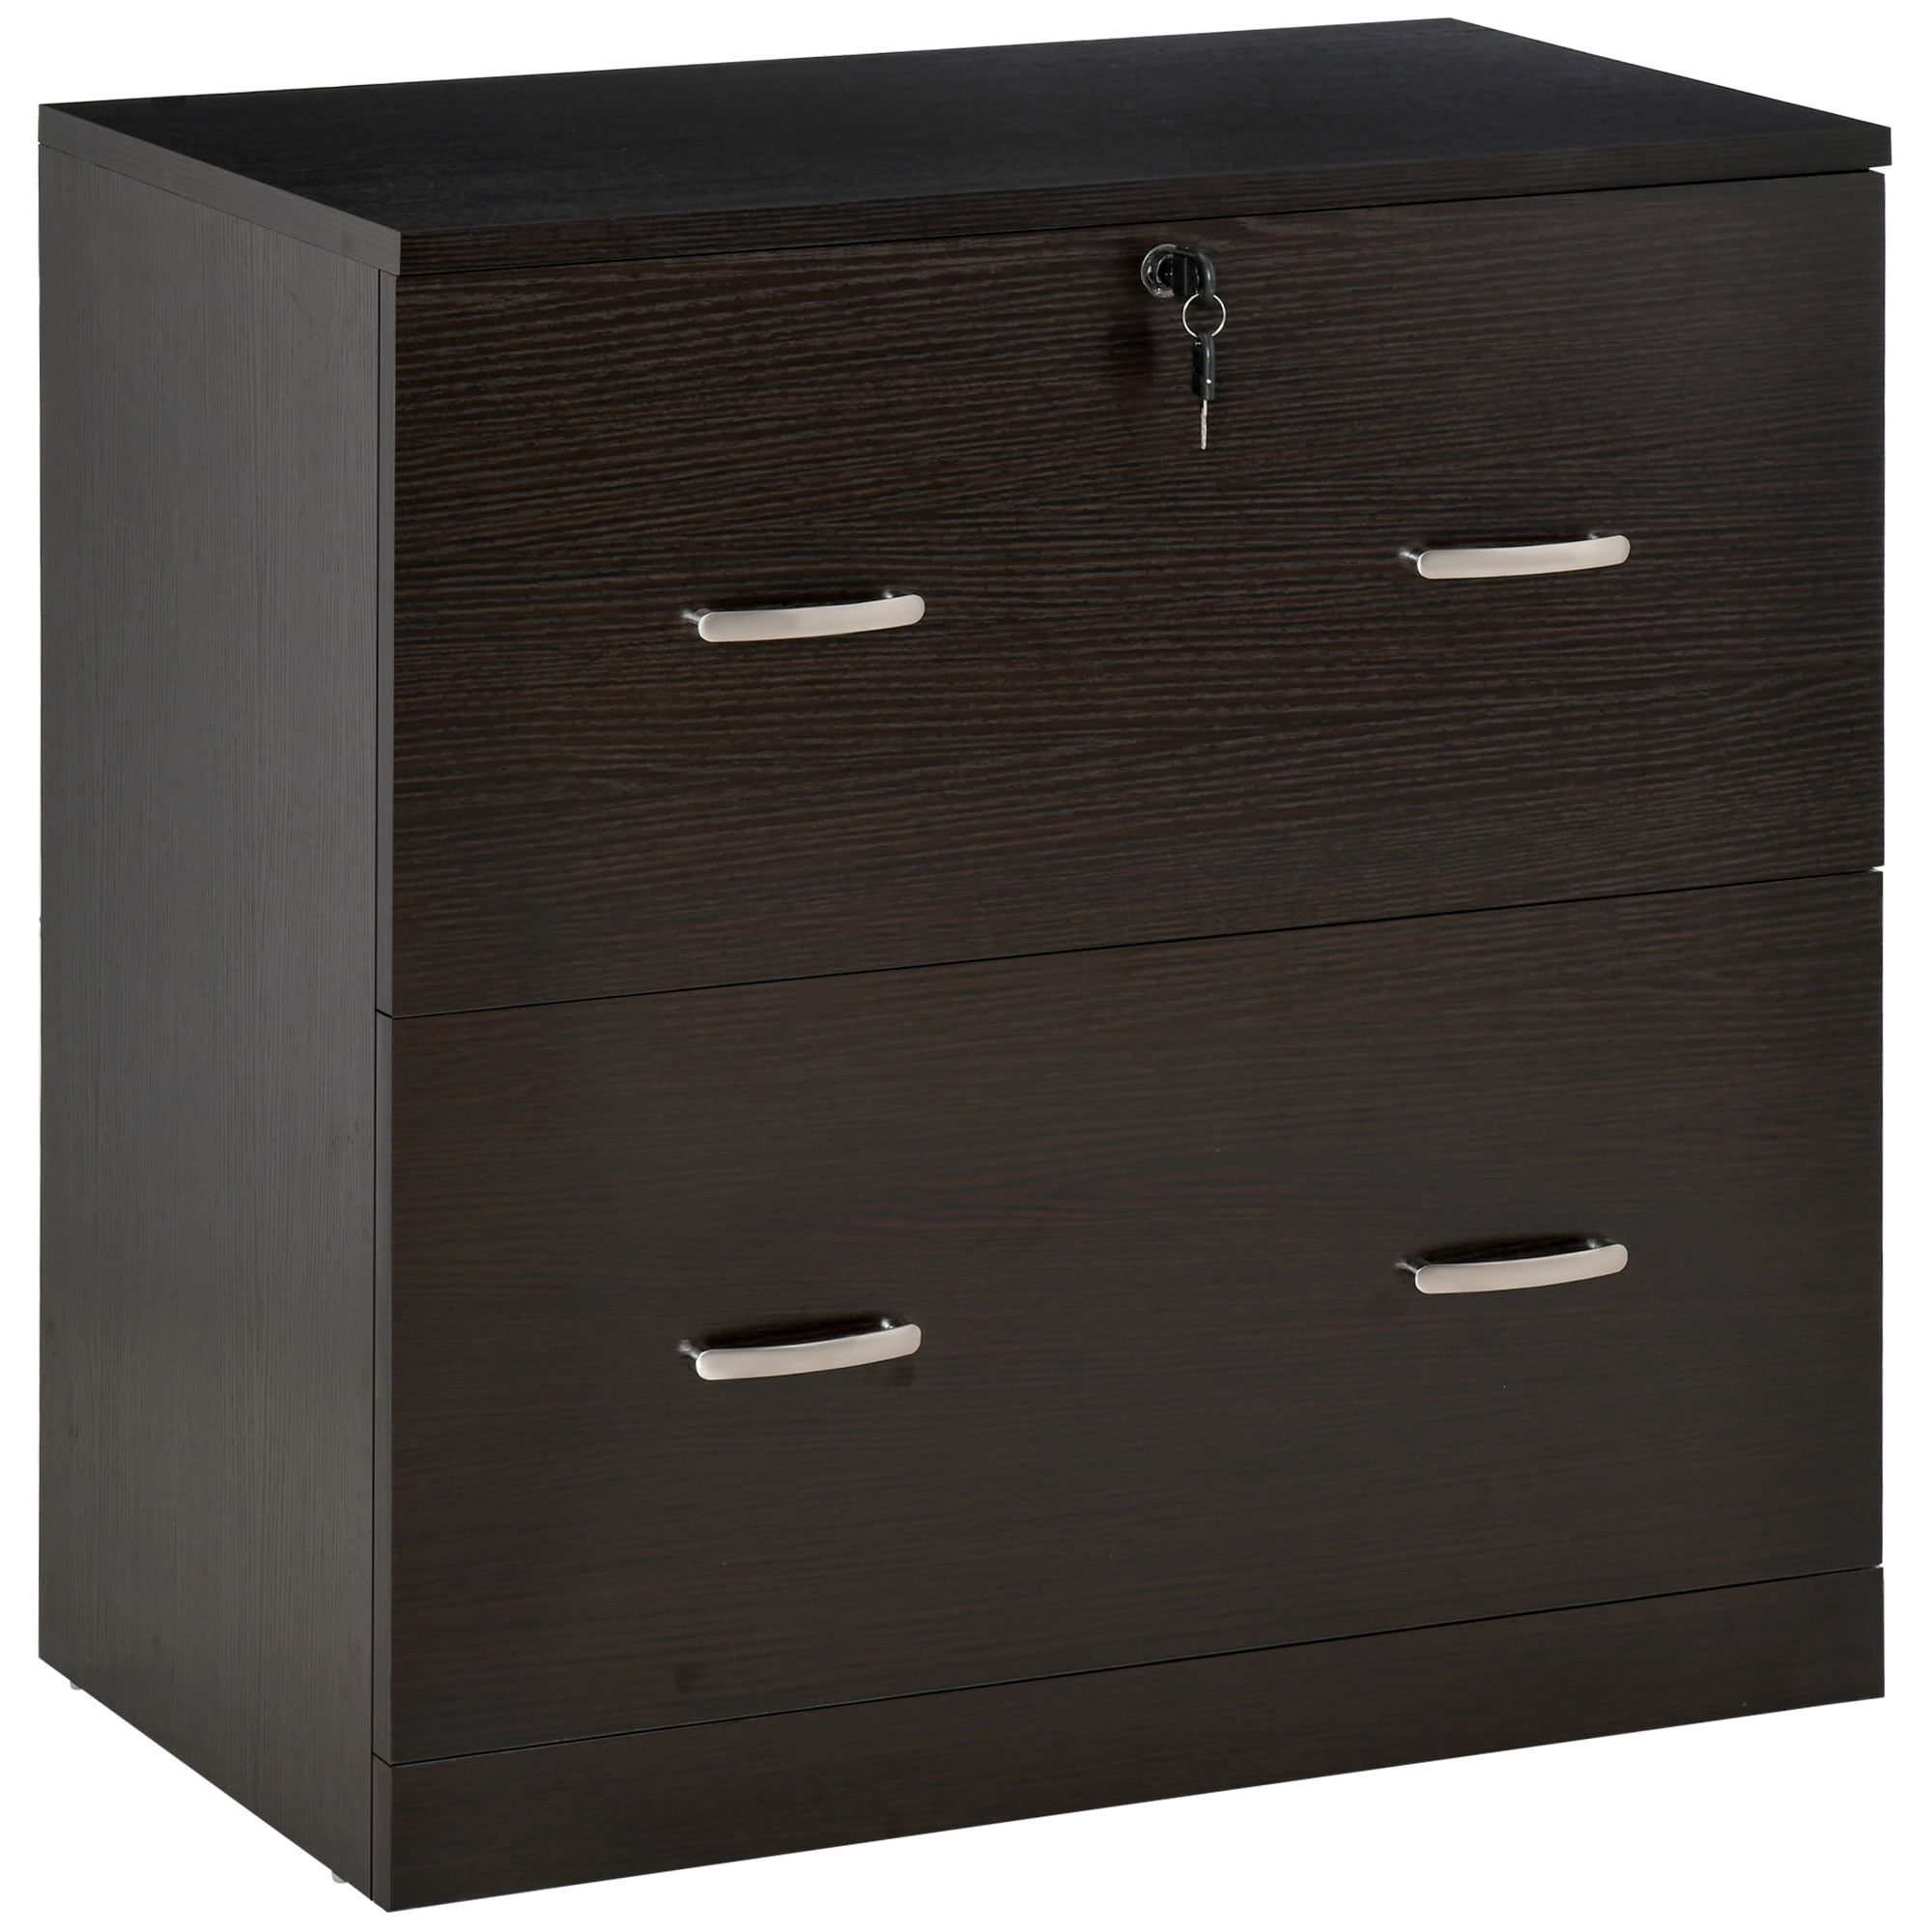 Vinsetto 2 Drawer File Cabinet With